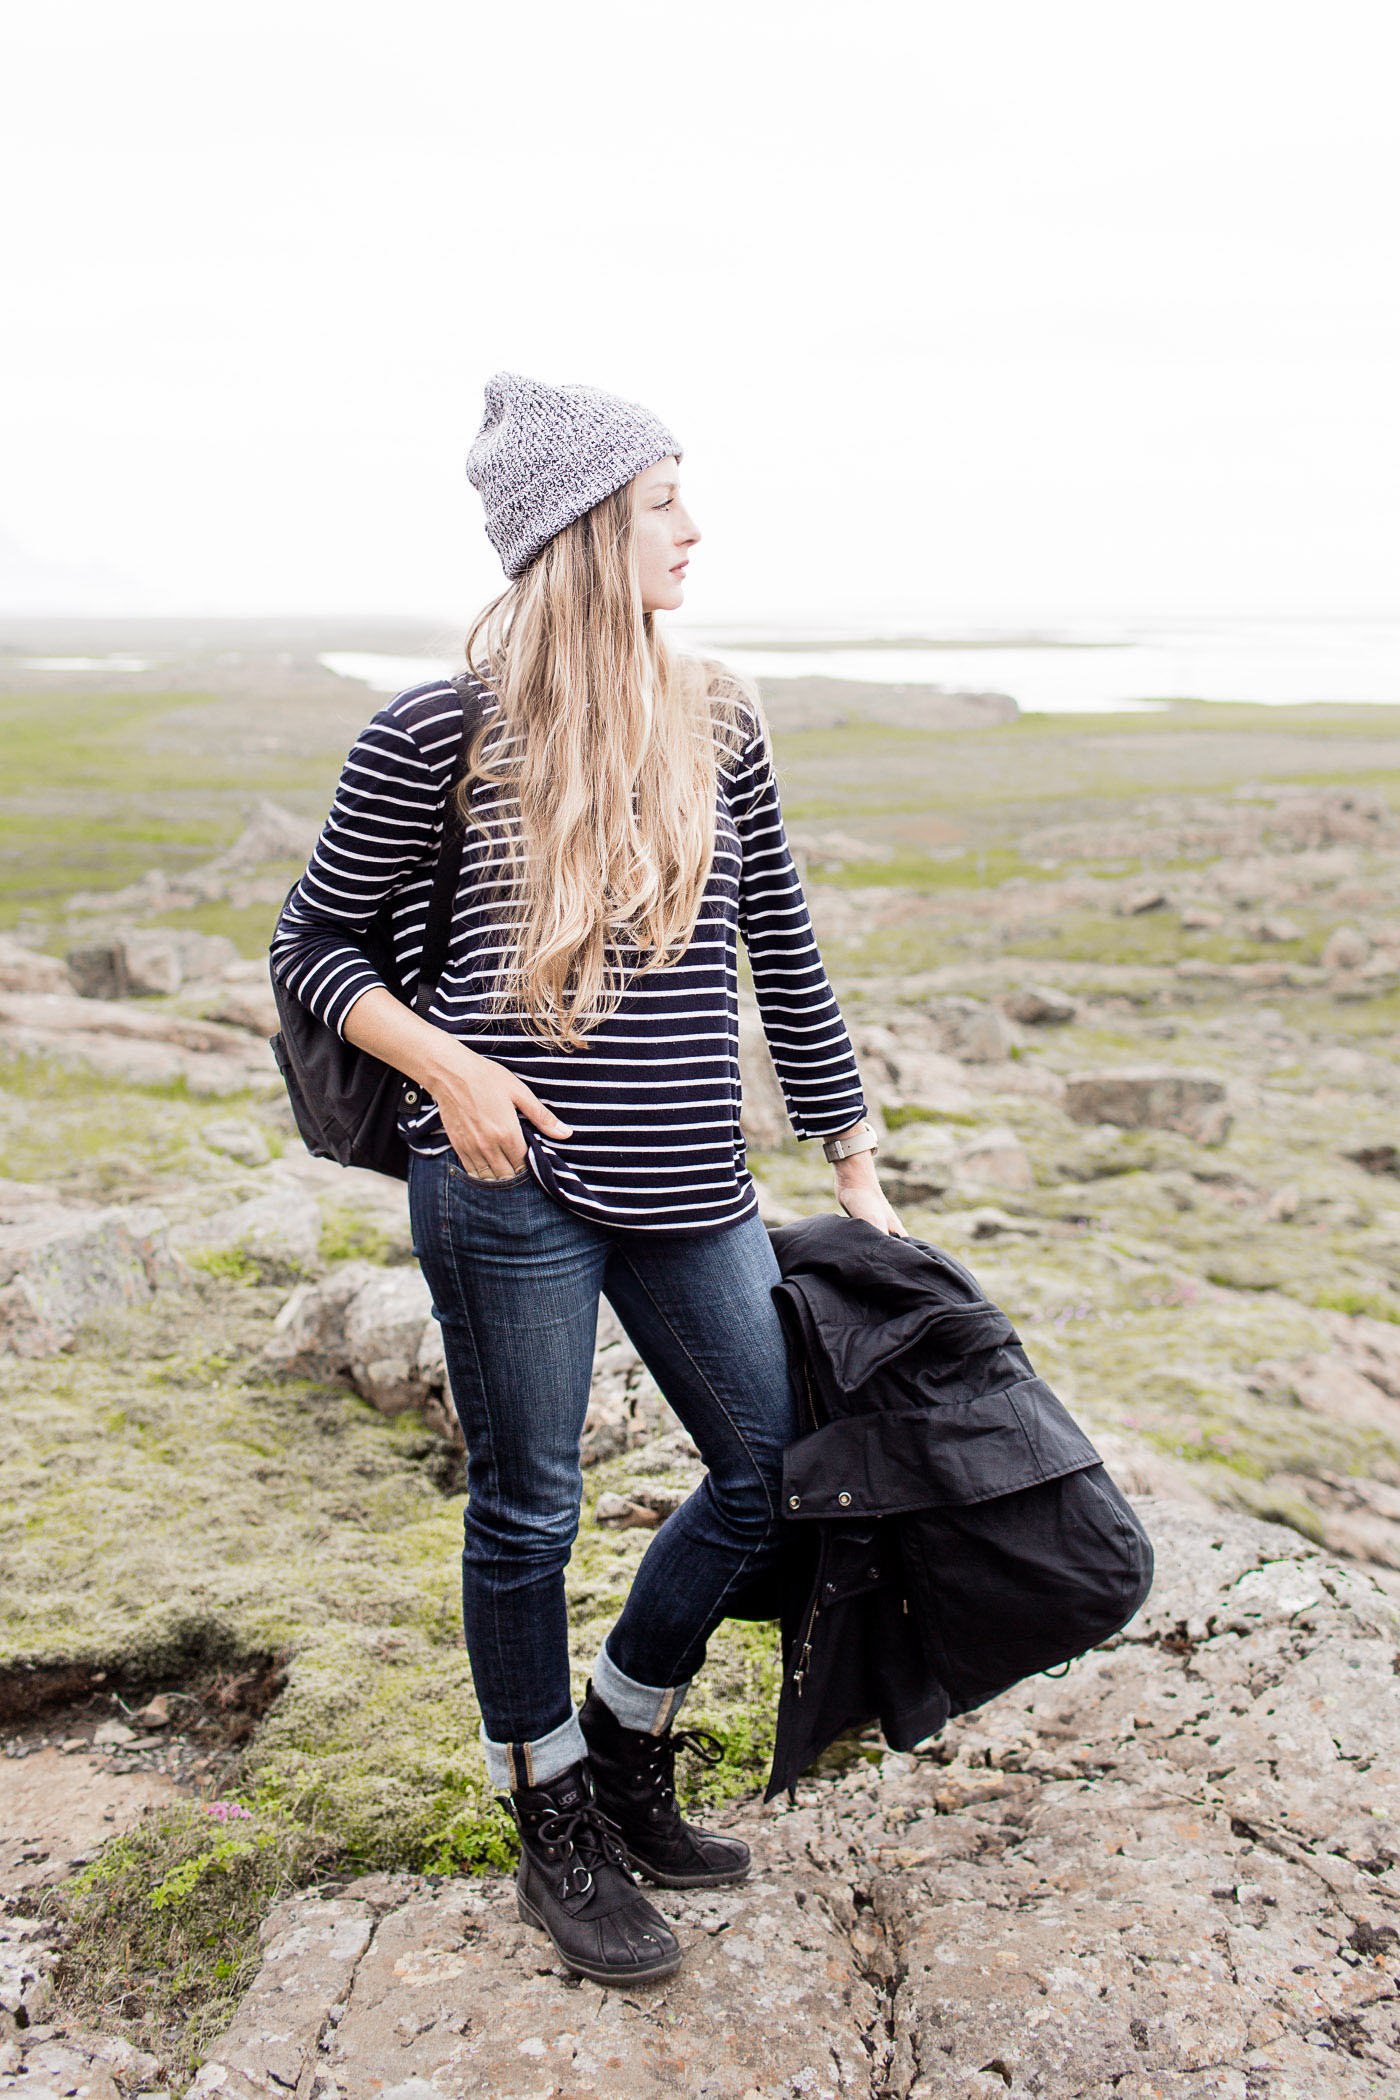 Summer outfit in Iceland, featuring Everlane, Heidi Merrick, Spiewak, and Ugg Australia.